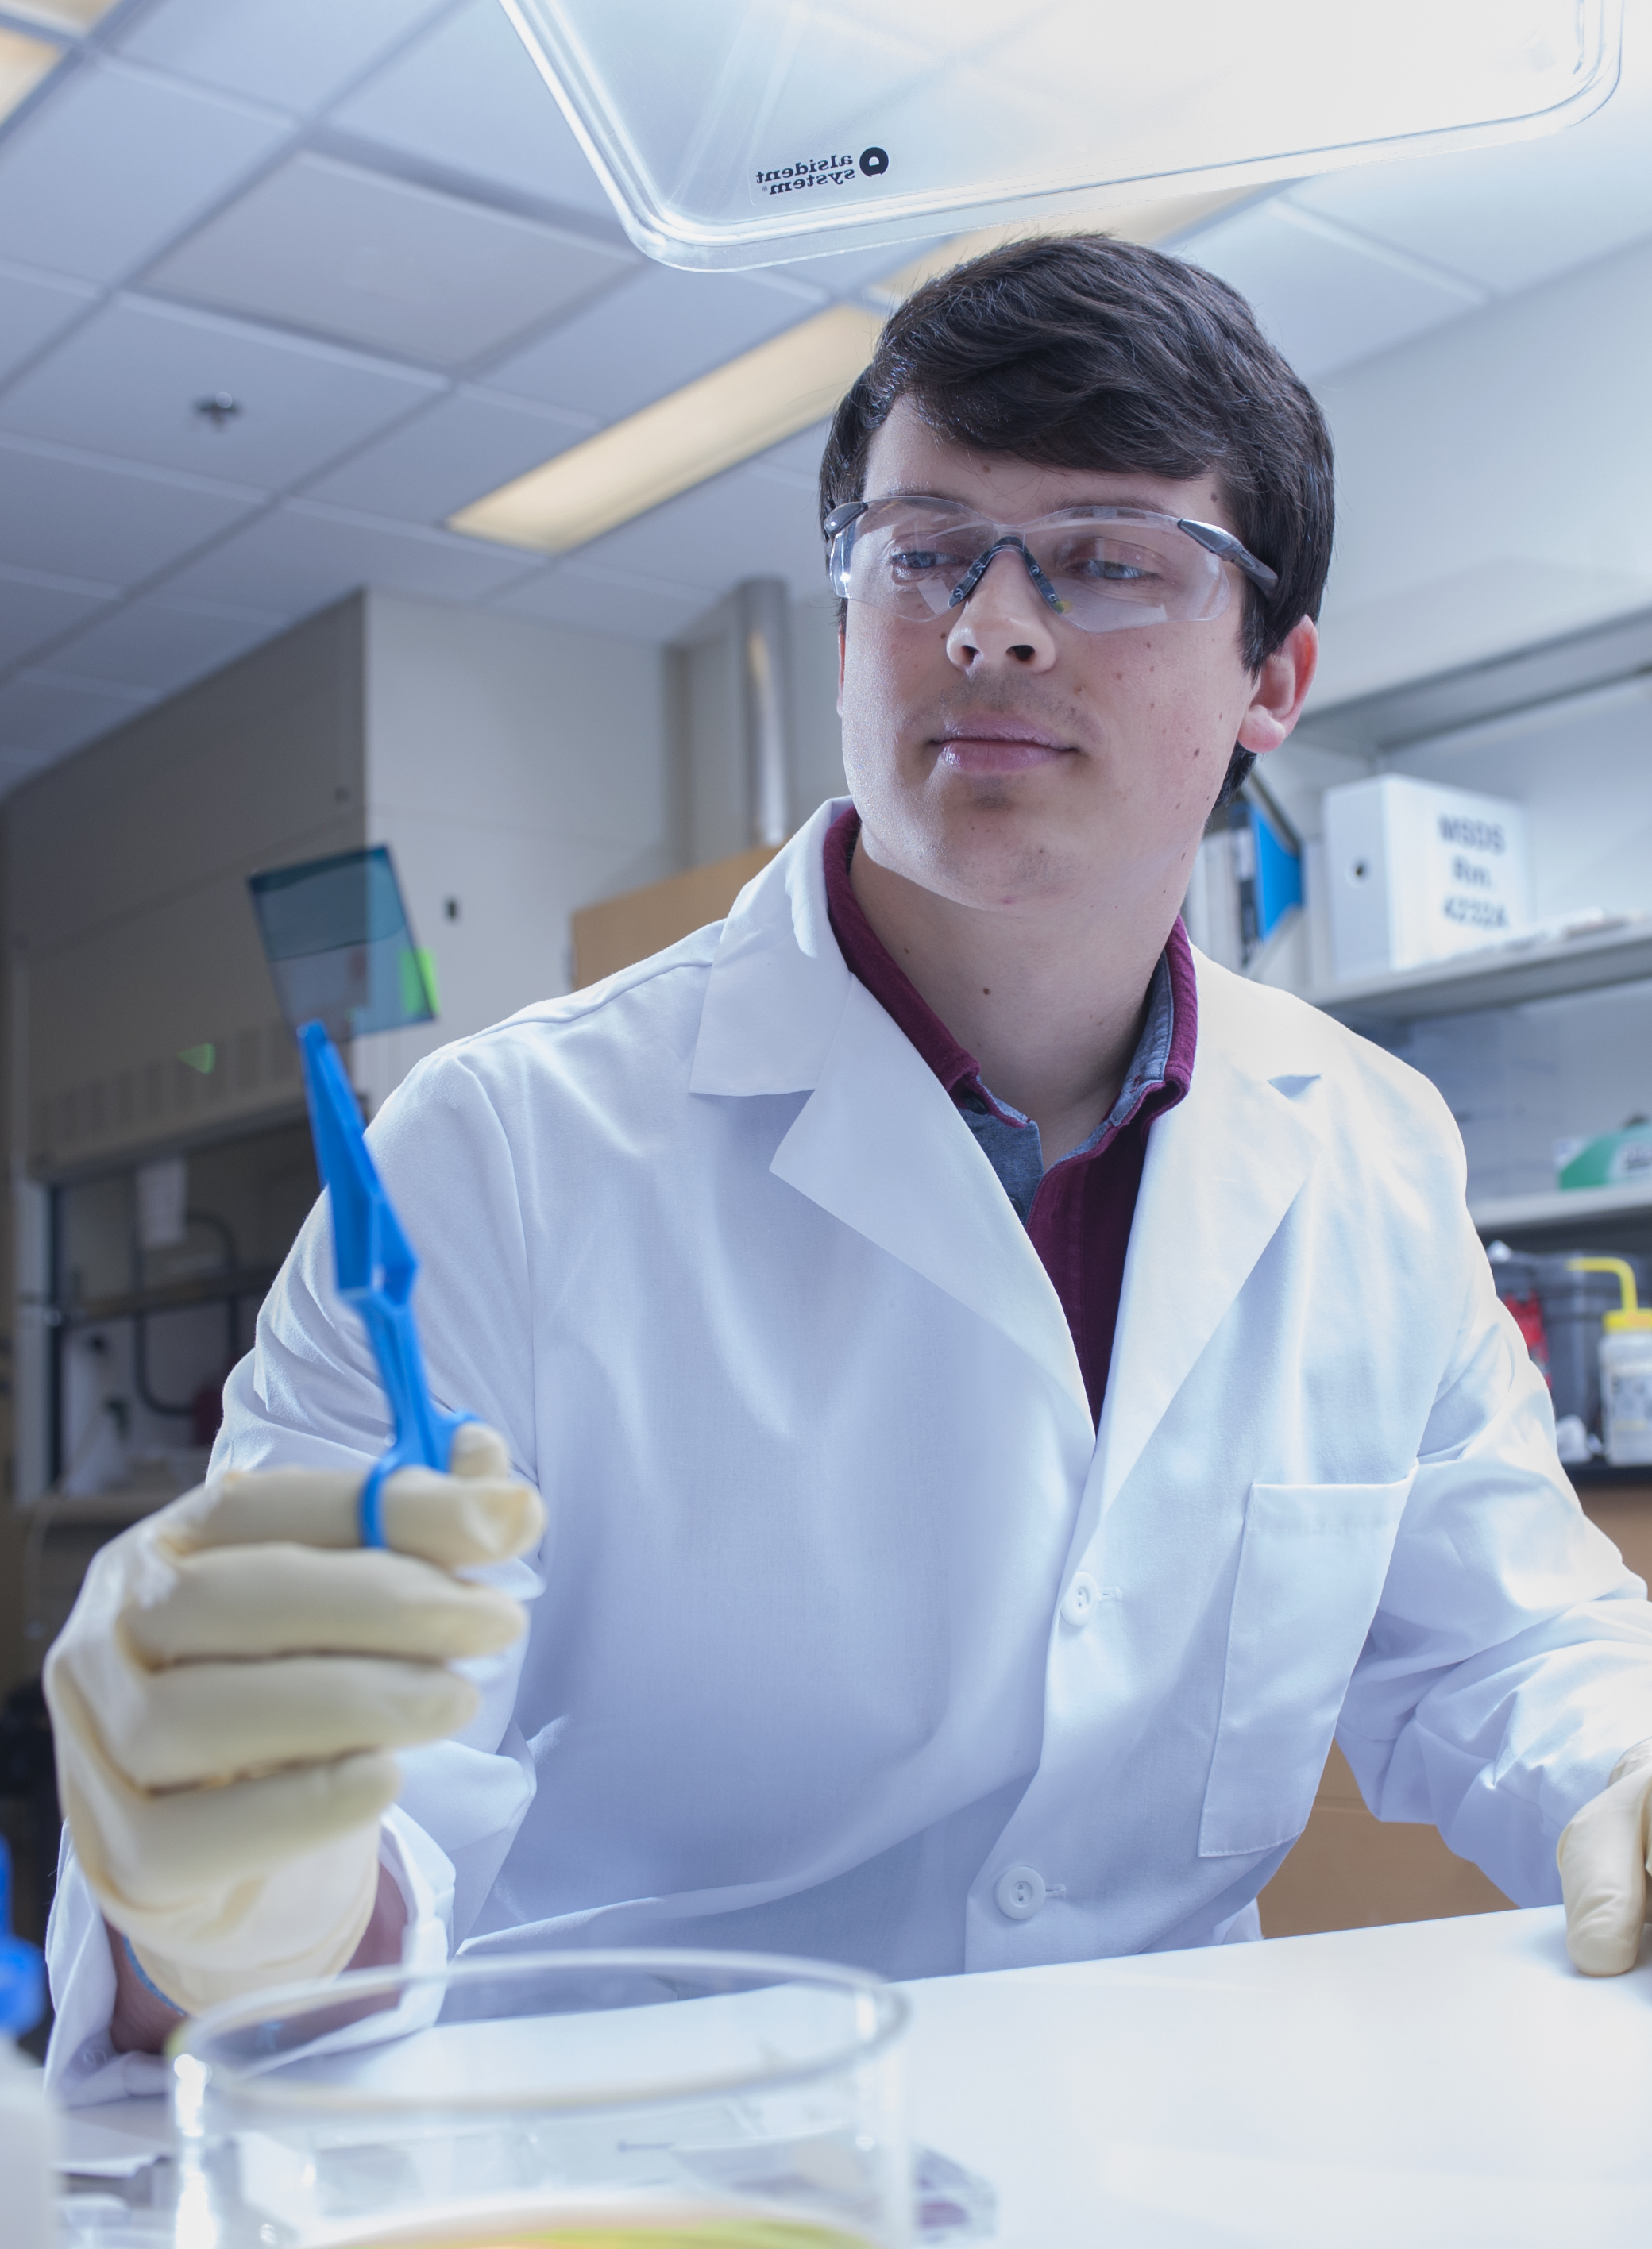 Graduate student Vladimir Kolesov, lead author of the paper, holding an electrically-doped polymer film. (Credit: Christopher Moore, Georgia Tech)